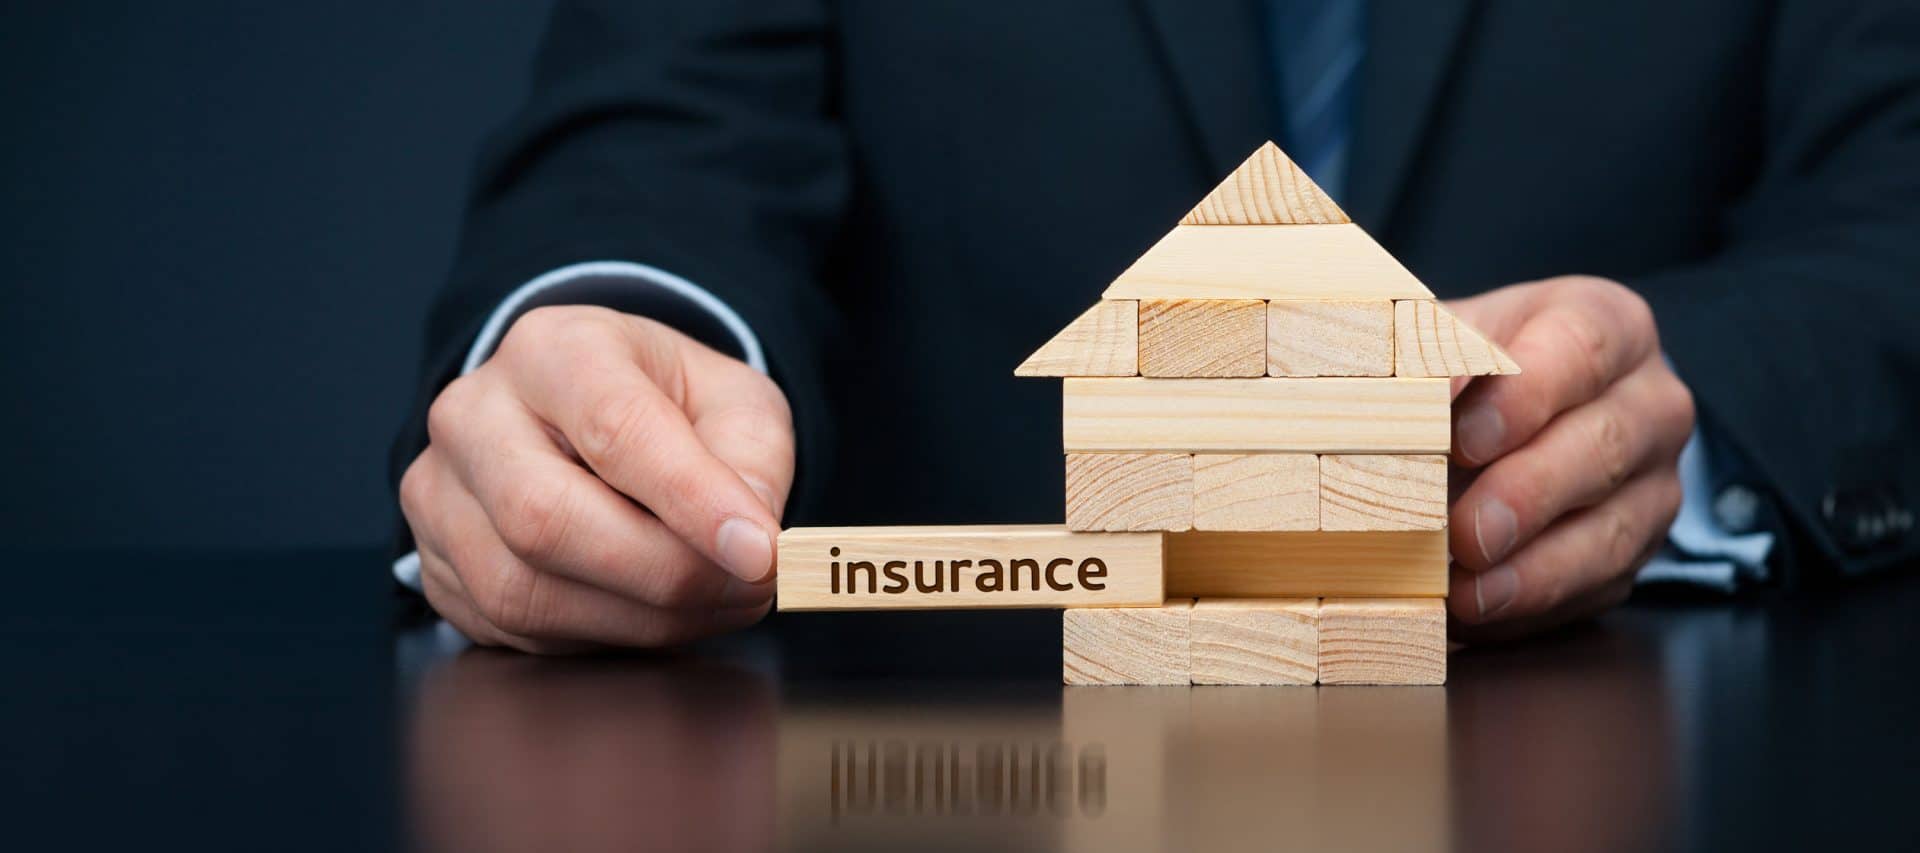 Family house insurance protection concept